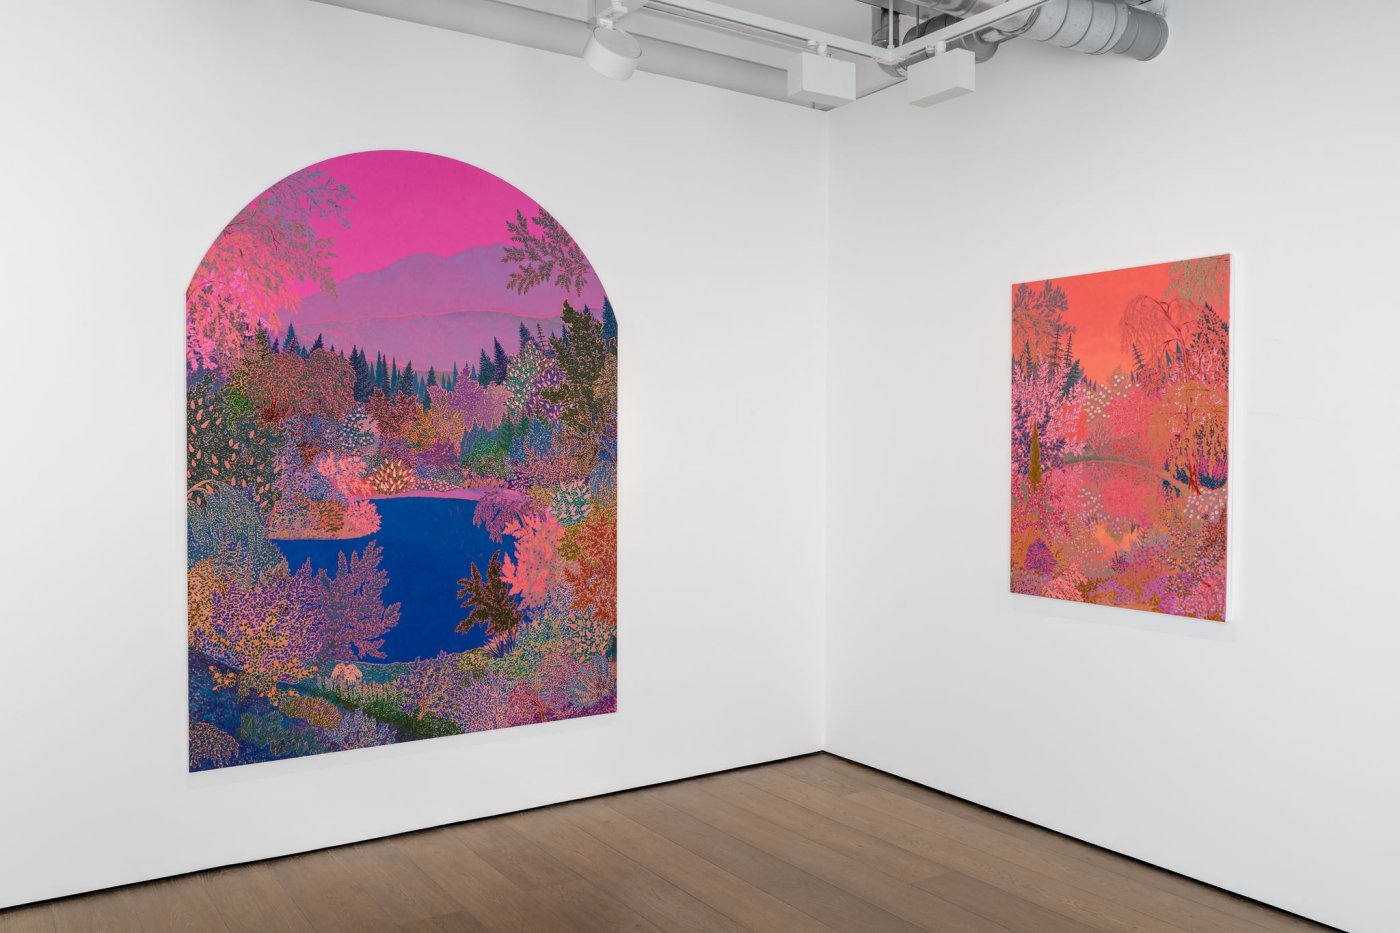 Installation image for John McAllister: some rhapsodies radiant, at Almine Rech